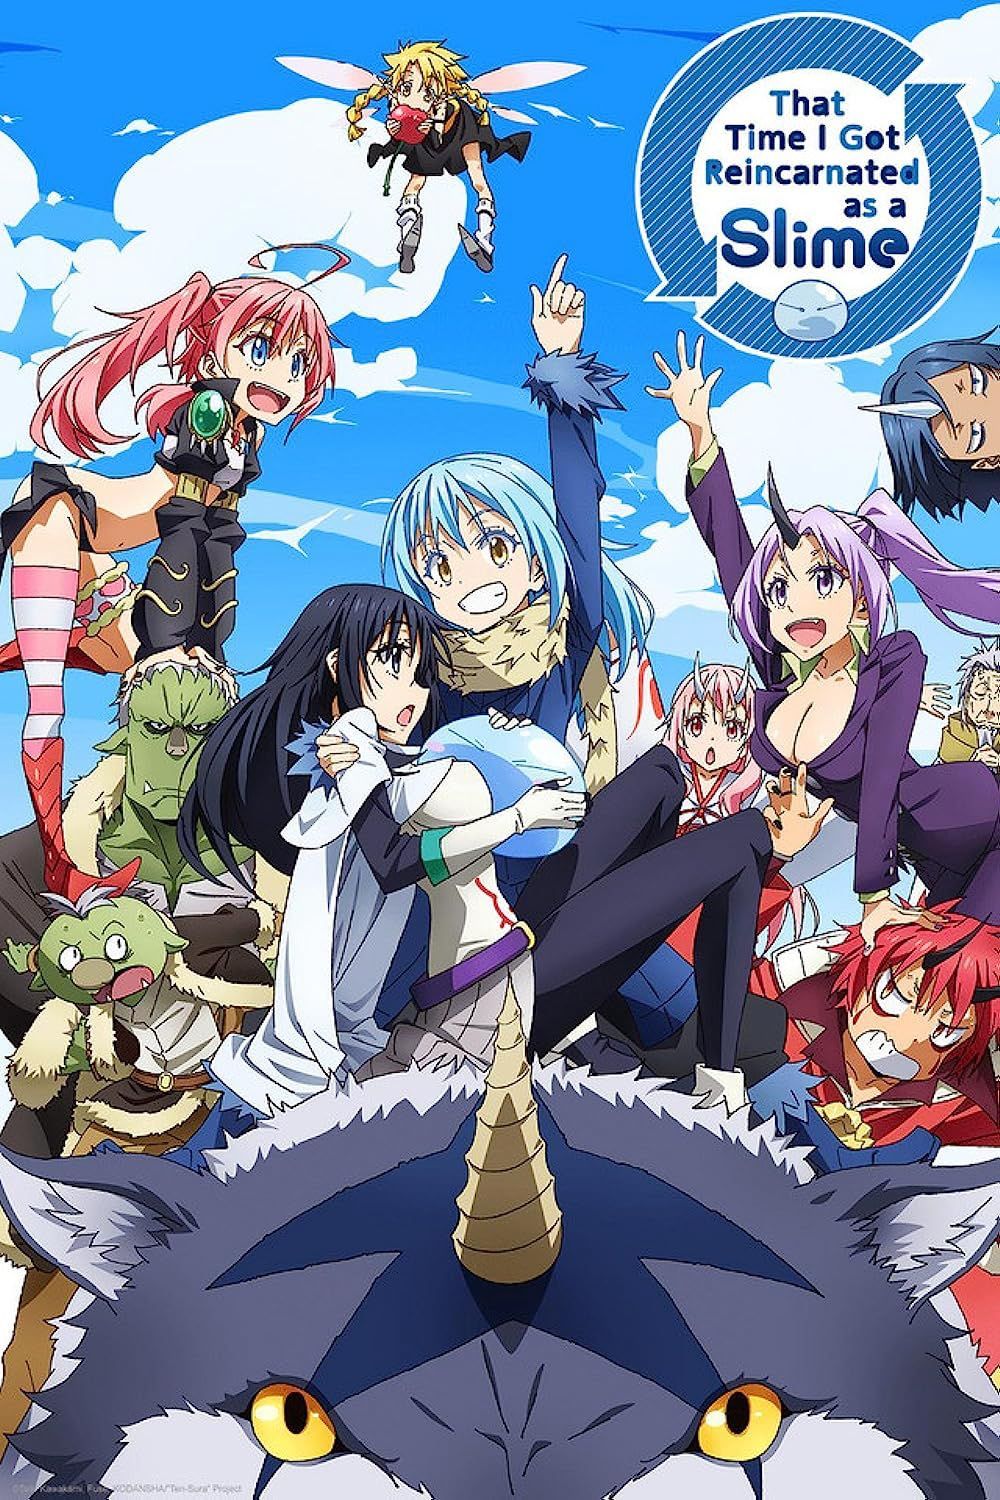 The cast of That Time I Got Reincarnated as a Slime posing joyfully on the official poster.